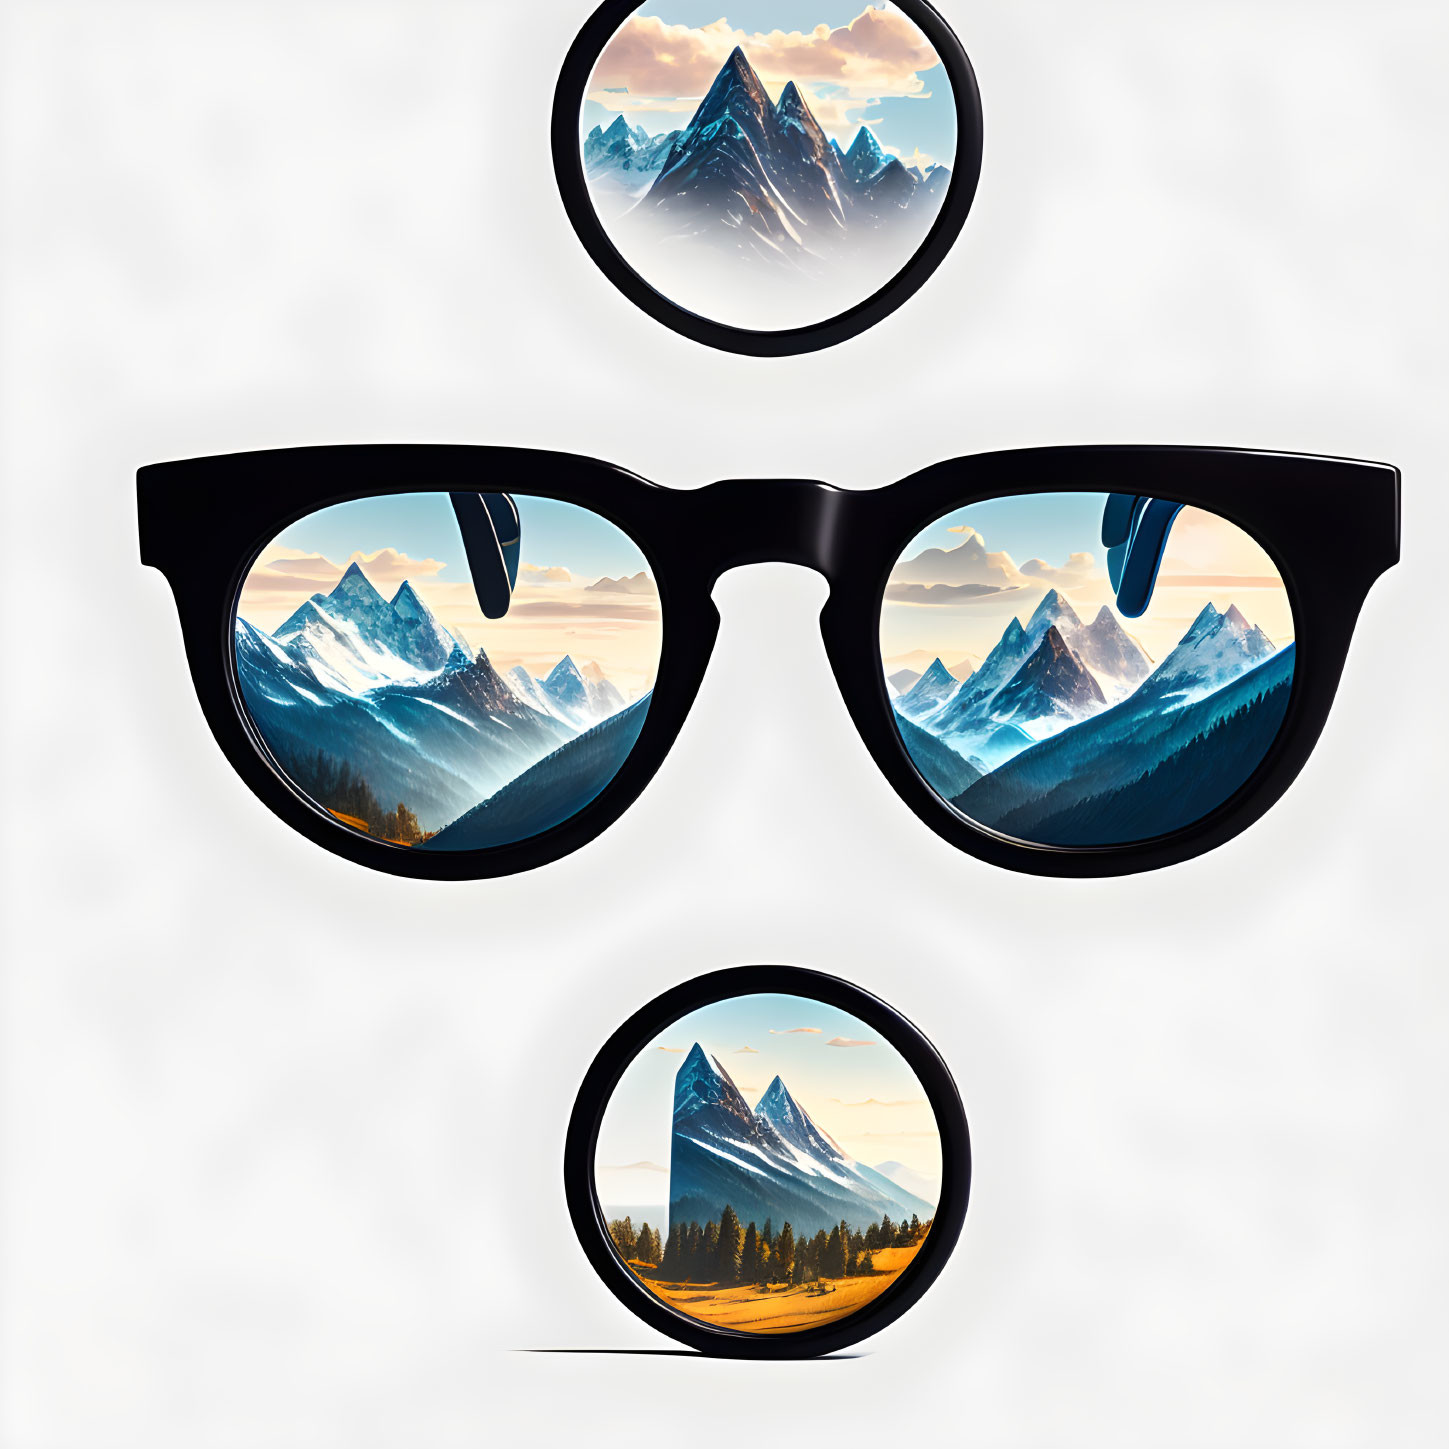 Black Glasses Reflecting Mountain Landscapes, Floating Monocle with Matching Views